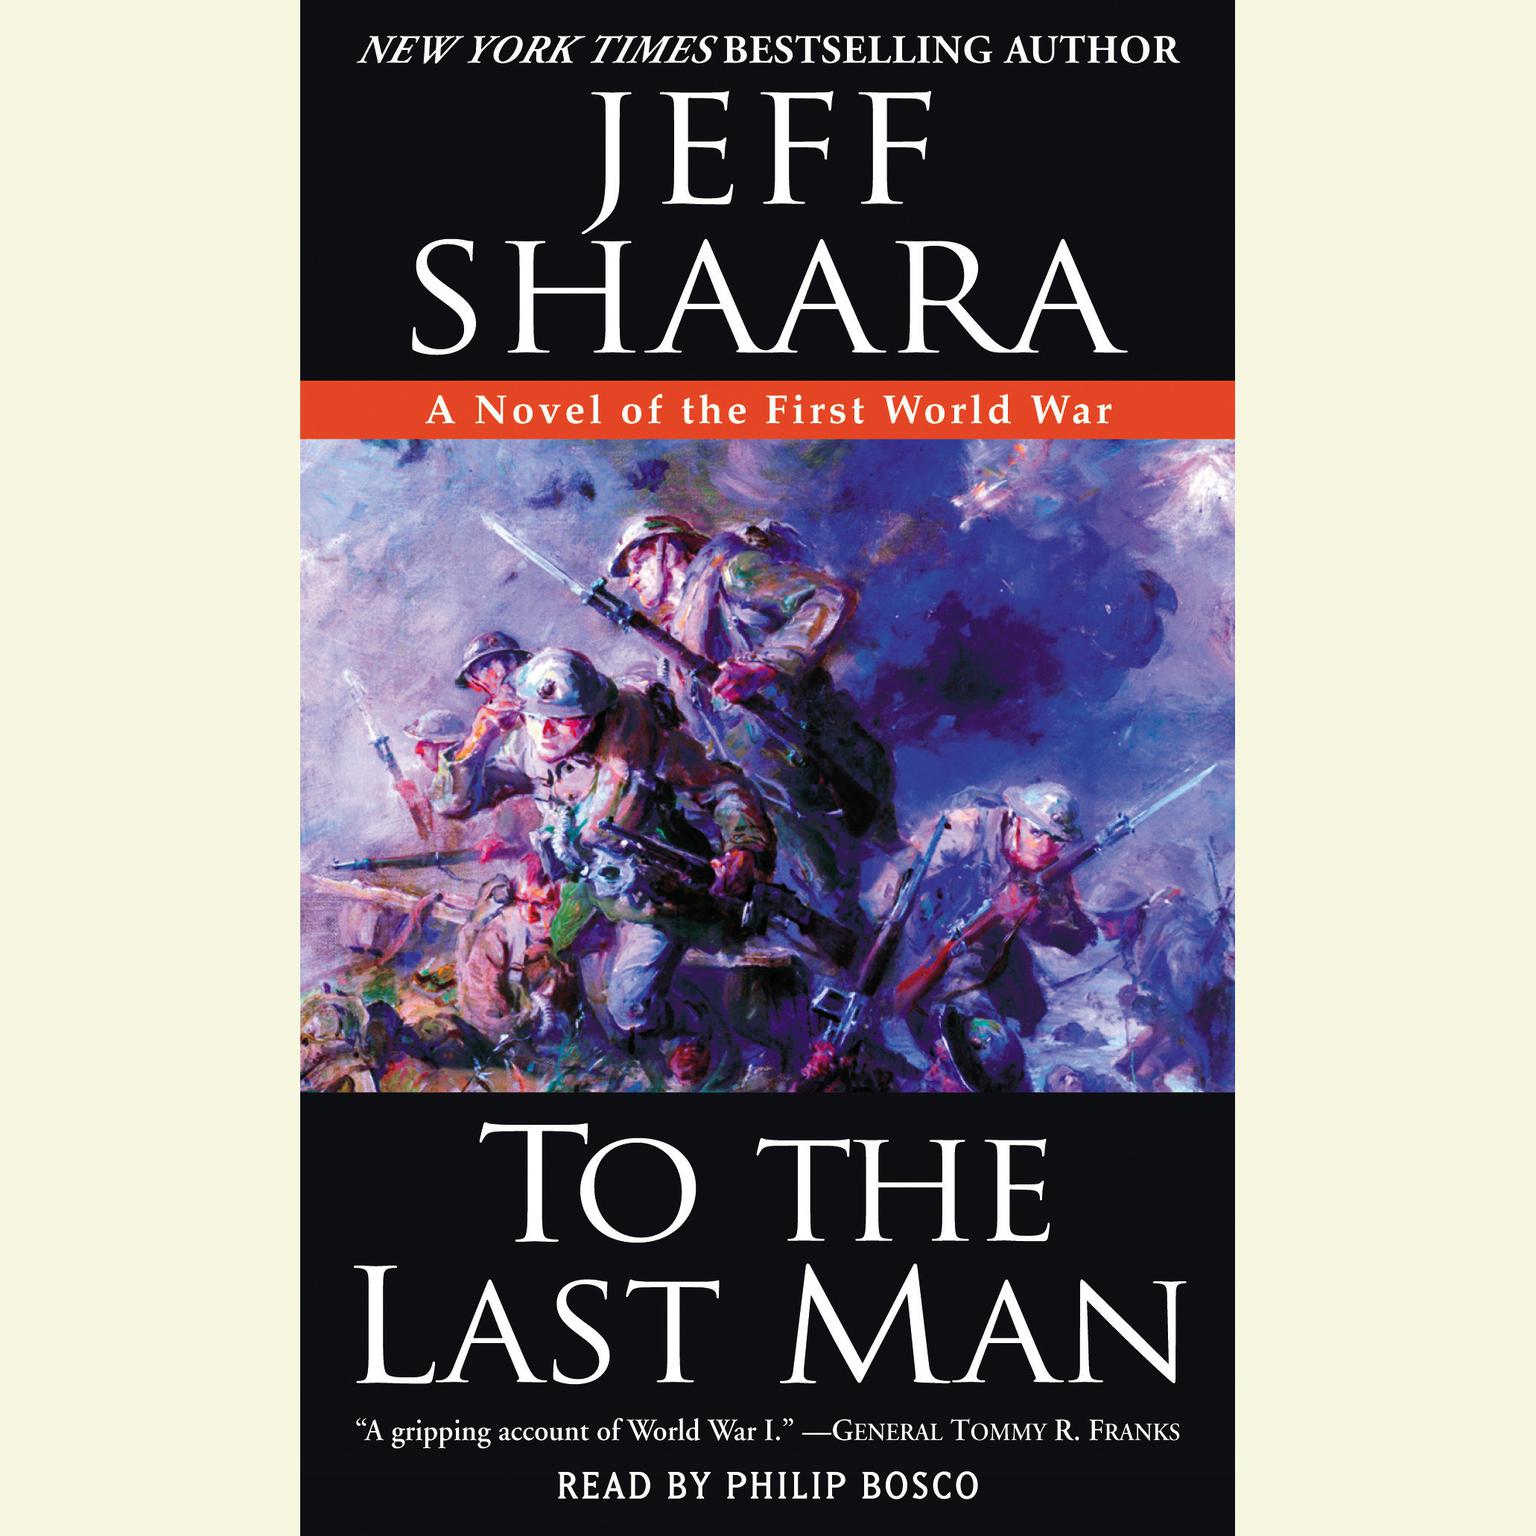 To the Last Man (Abridged): A Novel of the First World War Audiobook, by Jeff Shaara